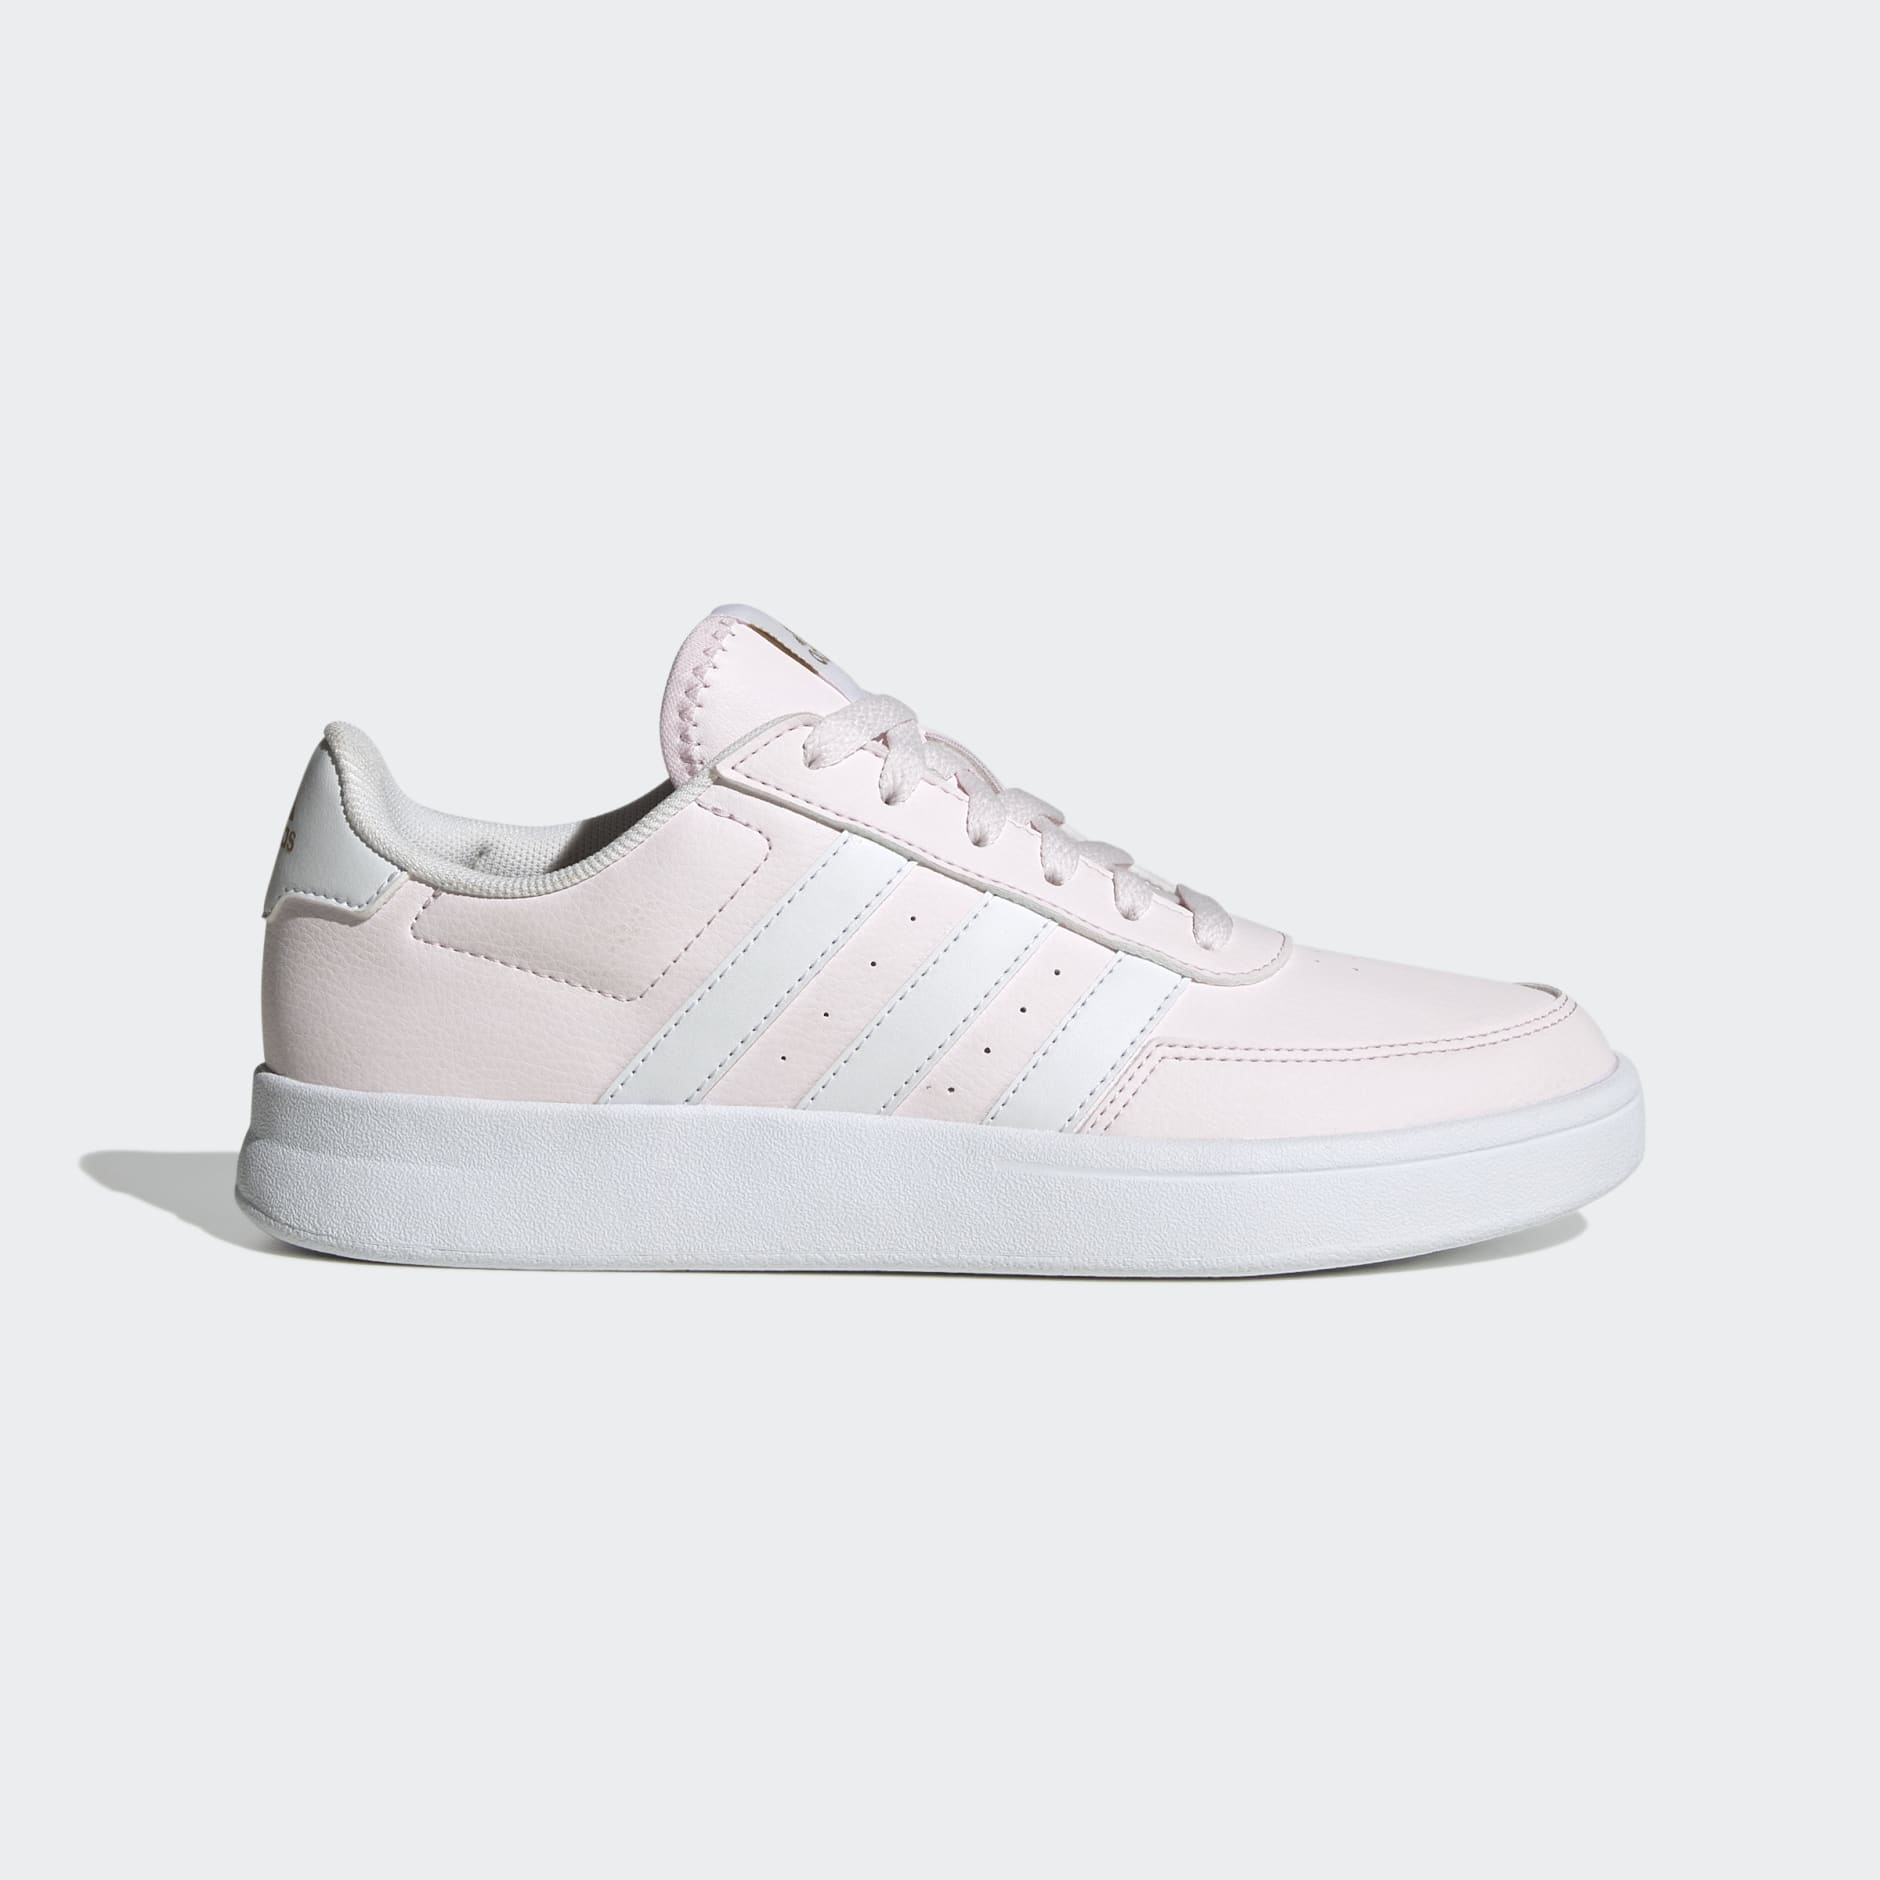 Shoes - Breaknet 2.0 Shoes - Pink | adidas South Africa